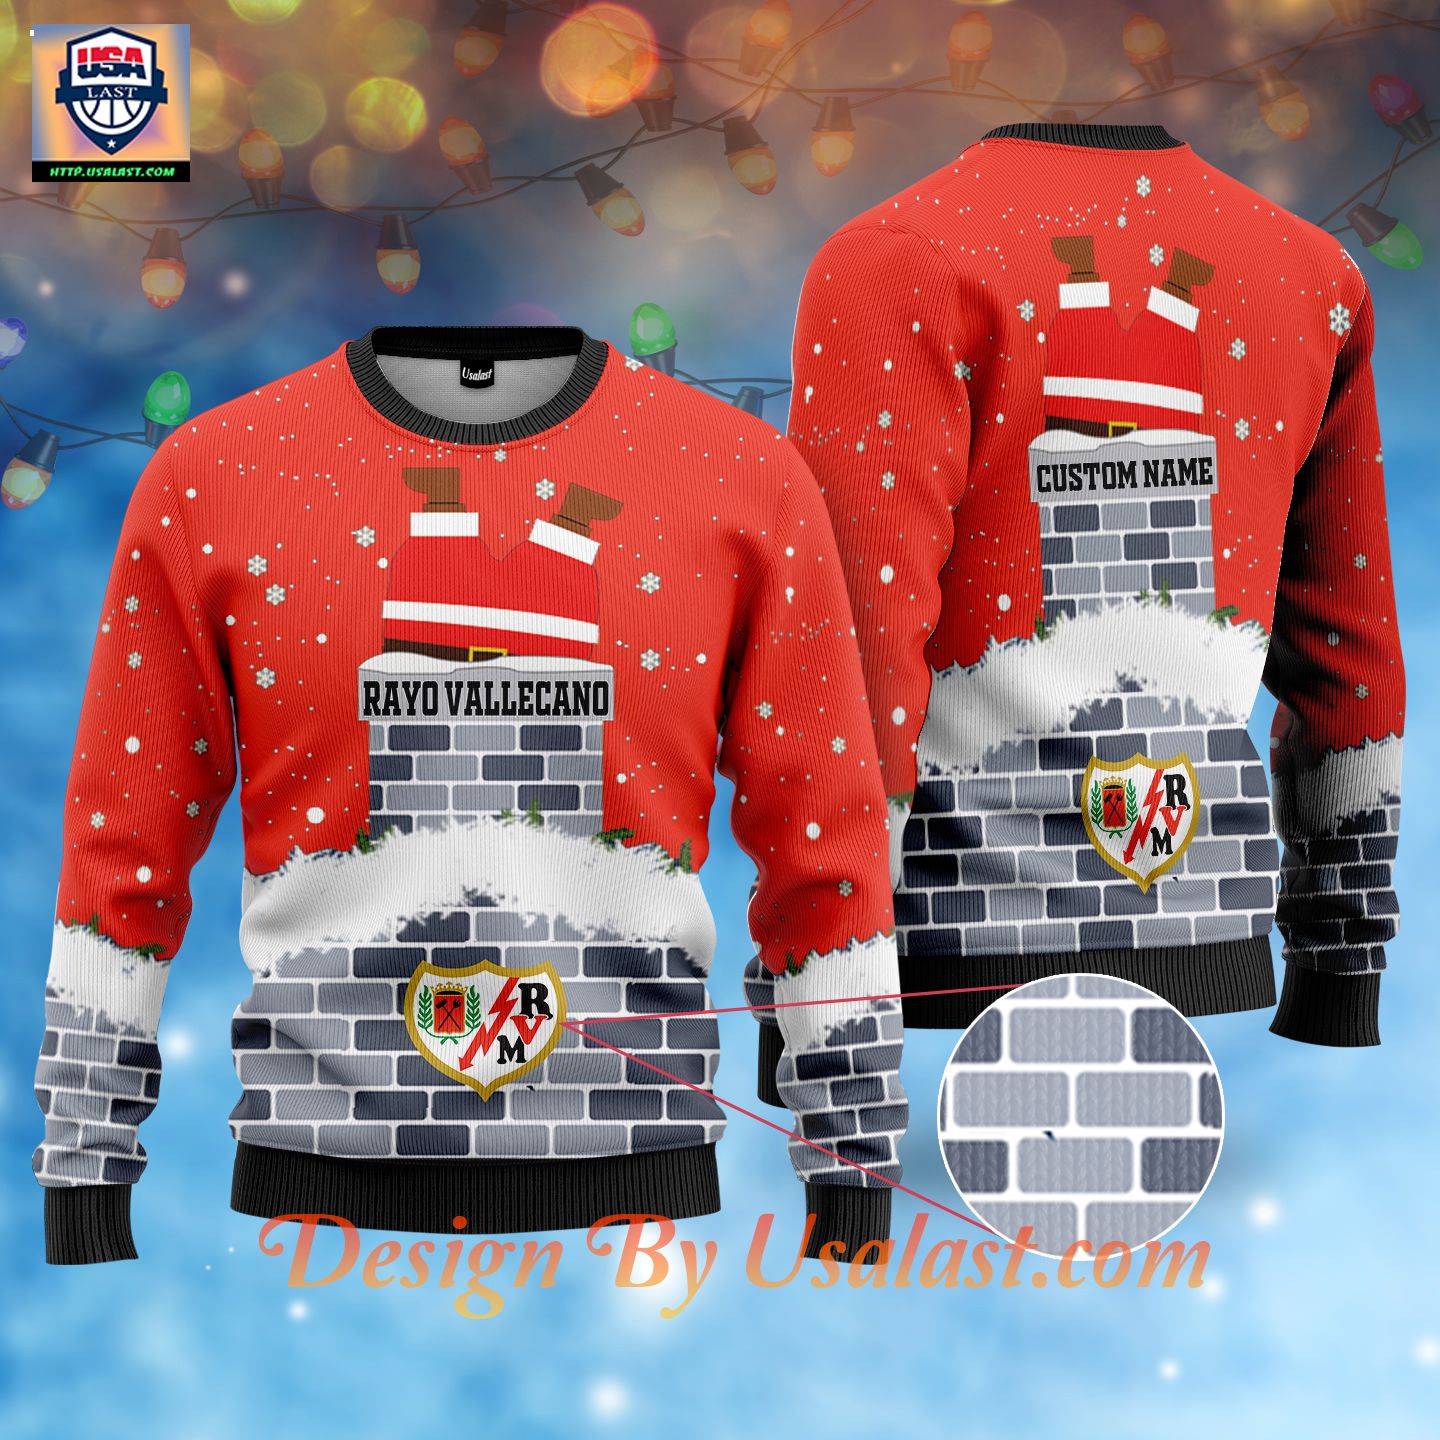 Excellent Rayo Vallecano Santa Claus Custom Name Ugly Christmas Sweater